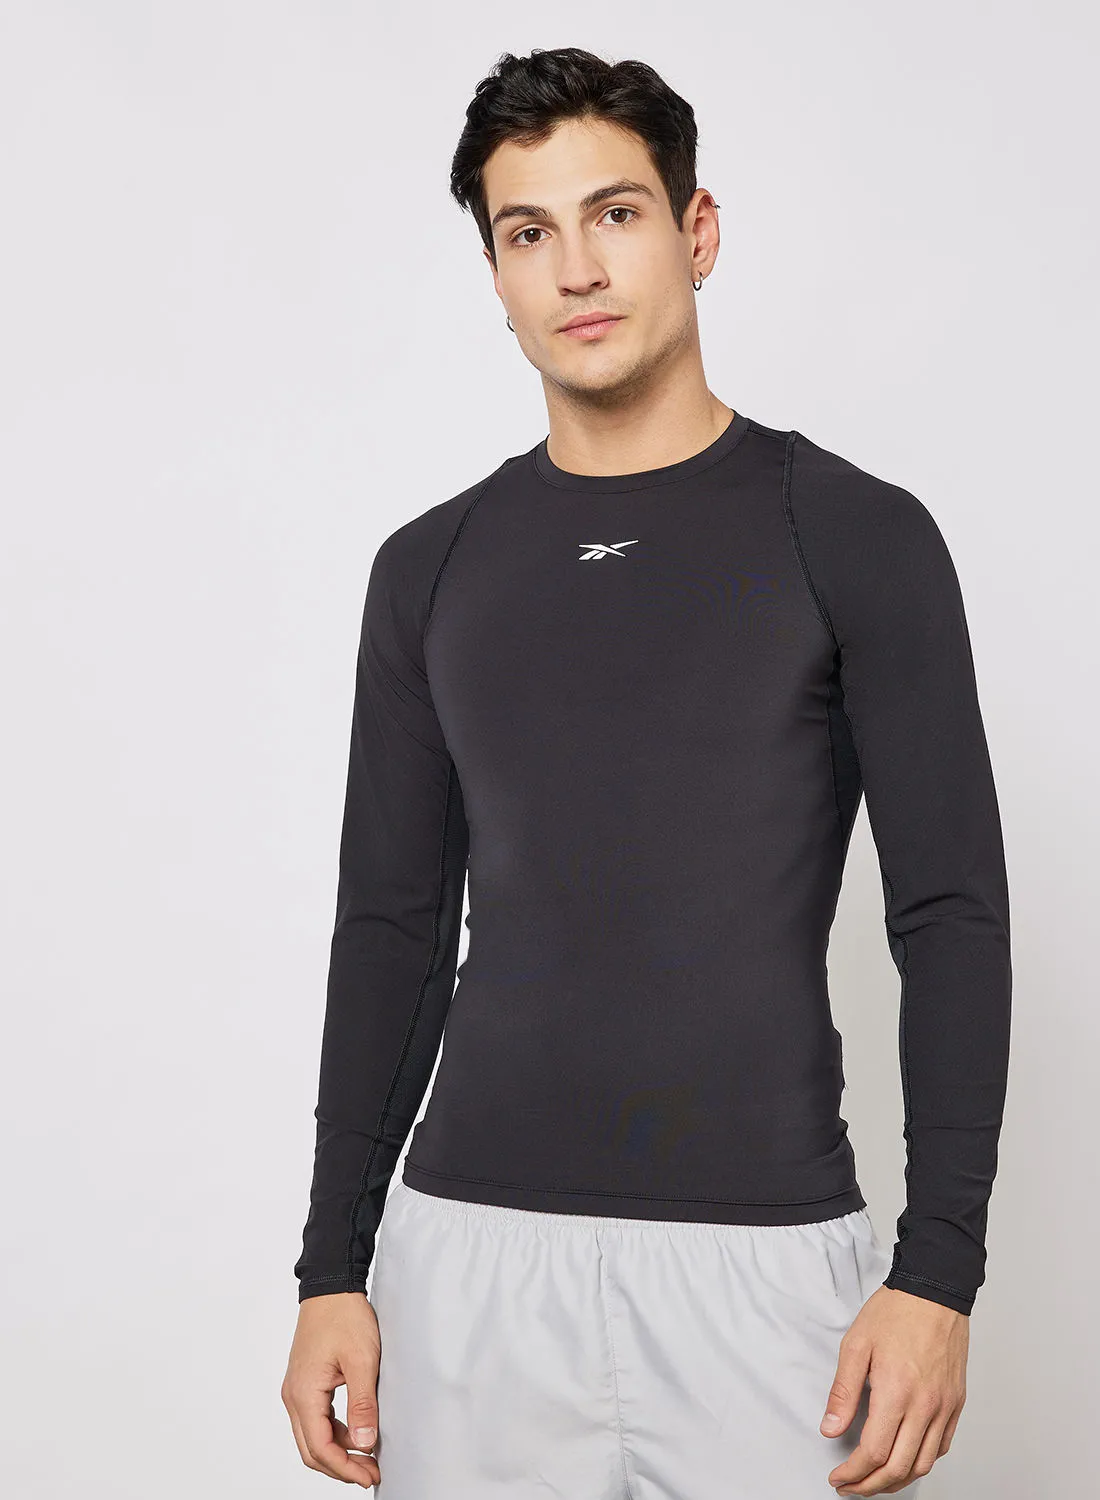 Reebok United By Fitness Compression Long Sleeve T-Shirt Black